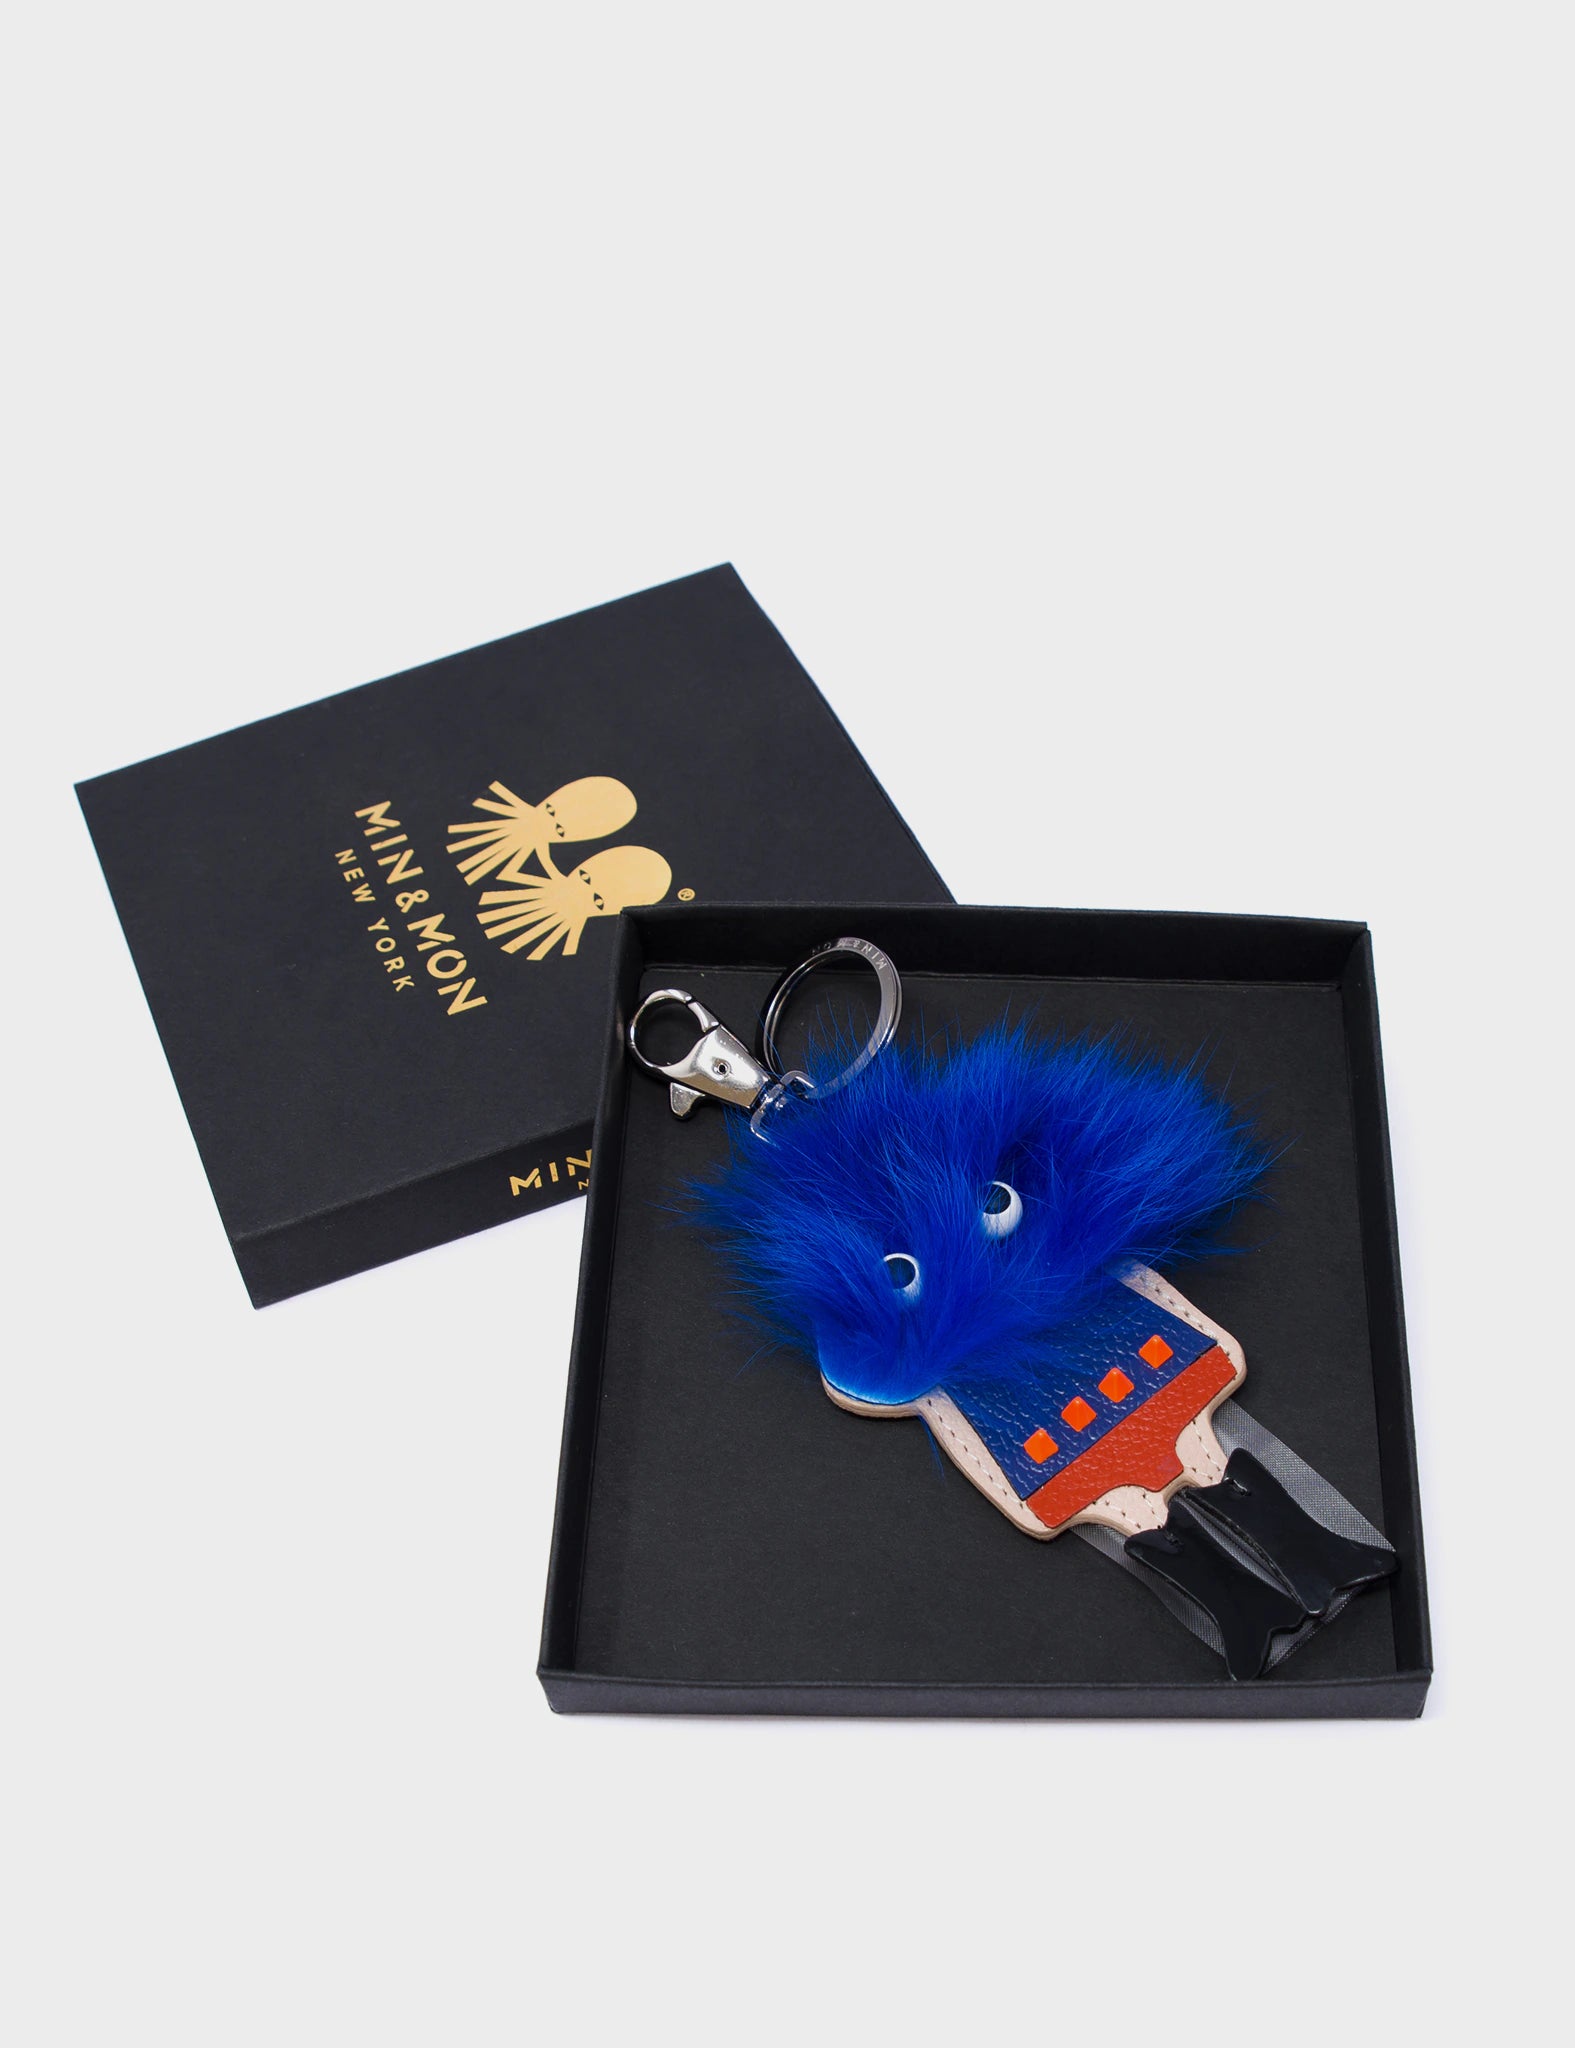 Monster Charm - Royal Blue Fur and Black Leather Boots - Box 